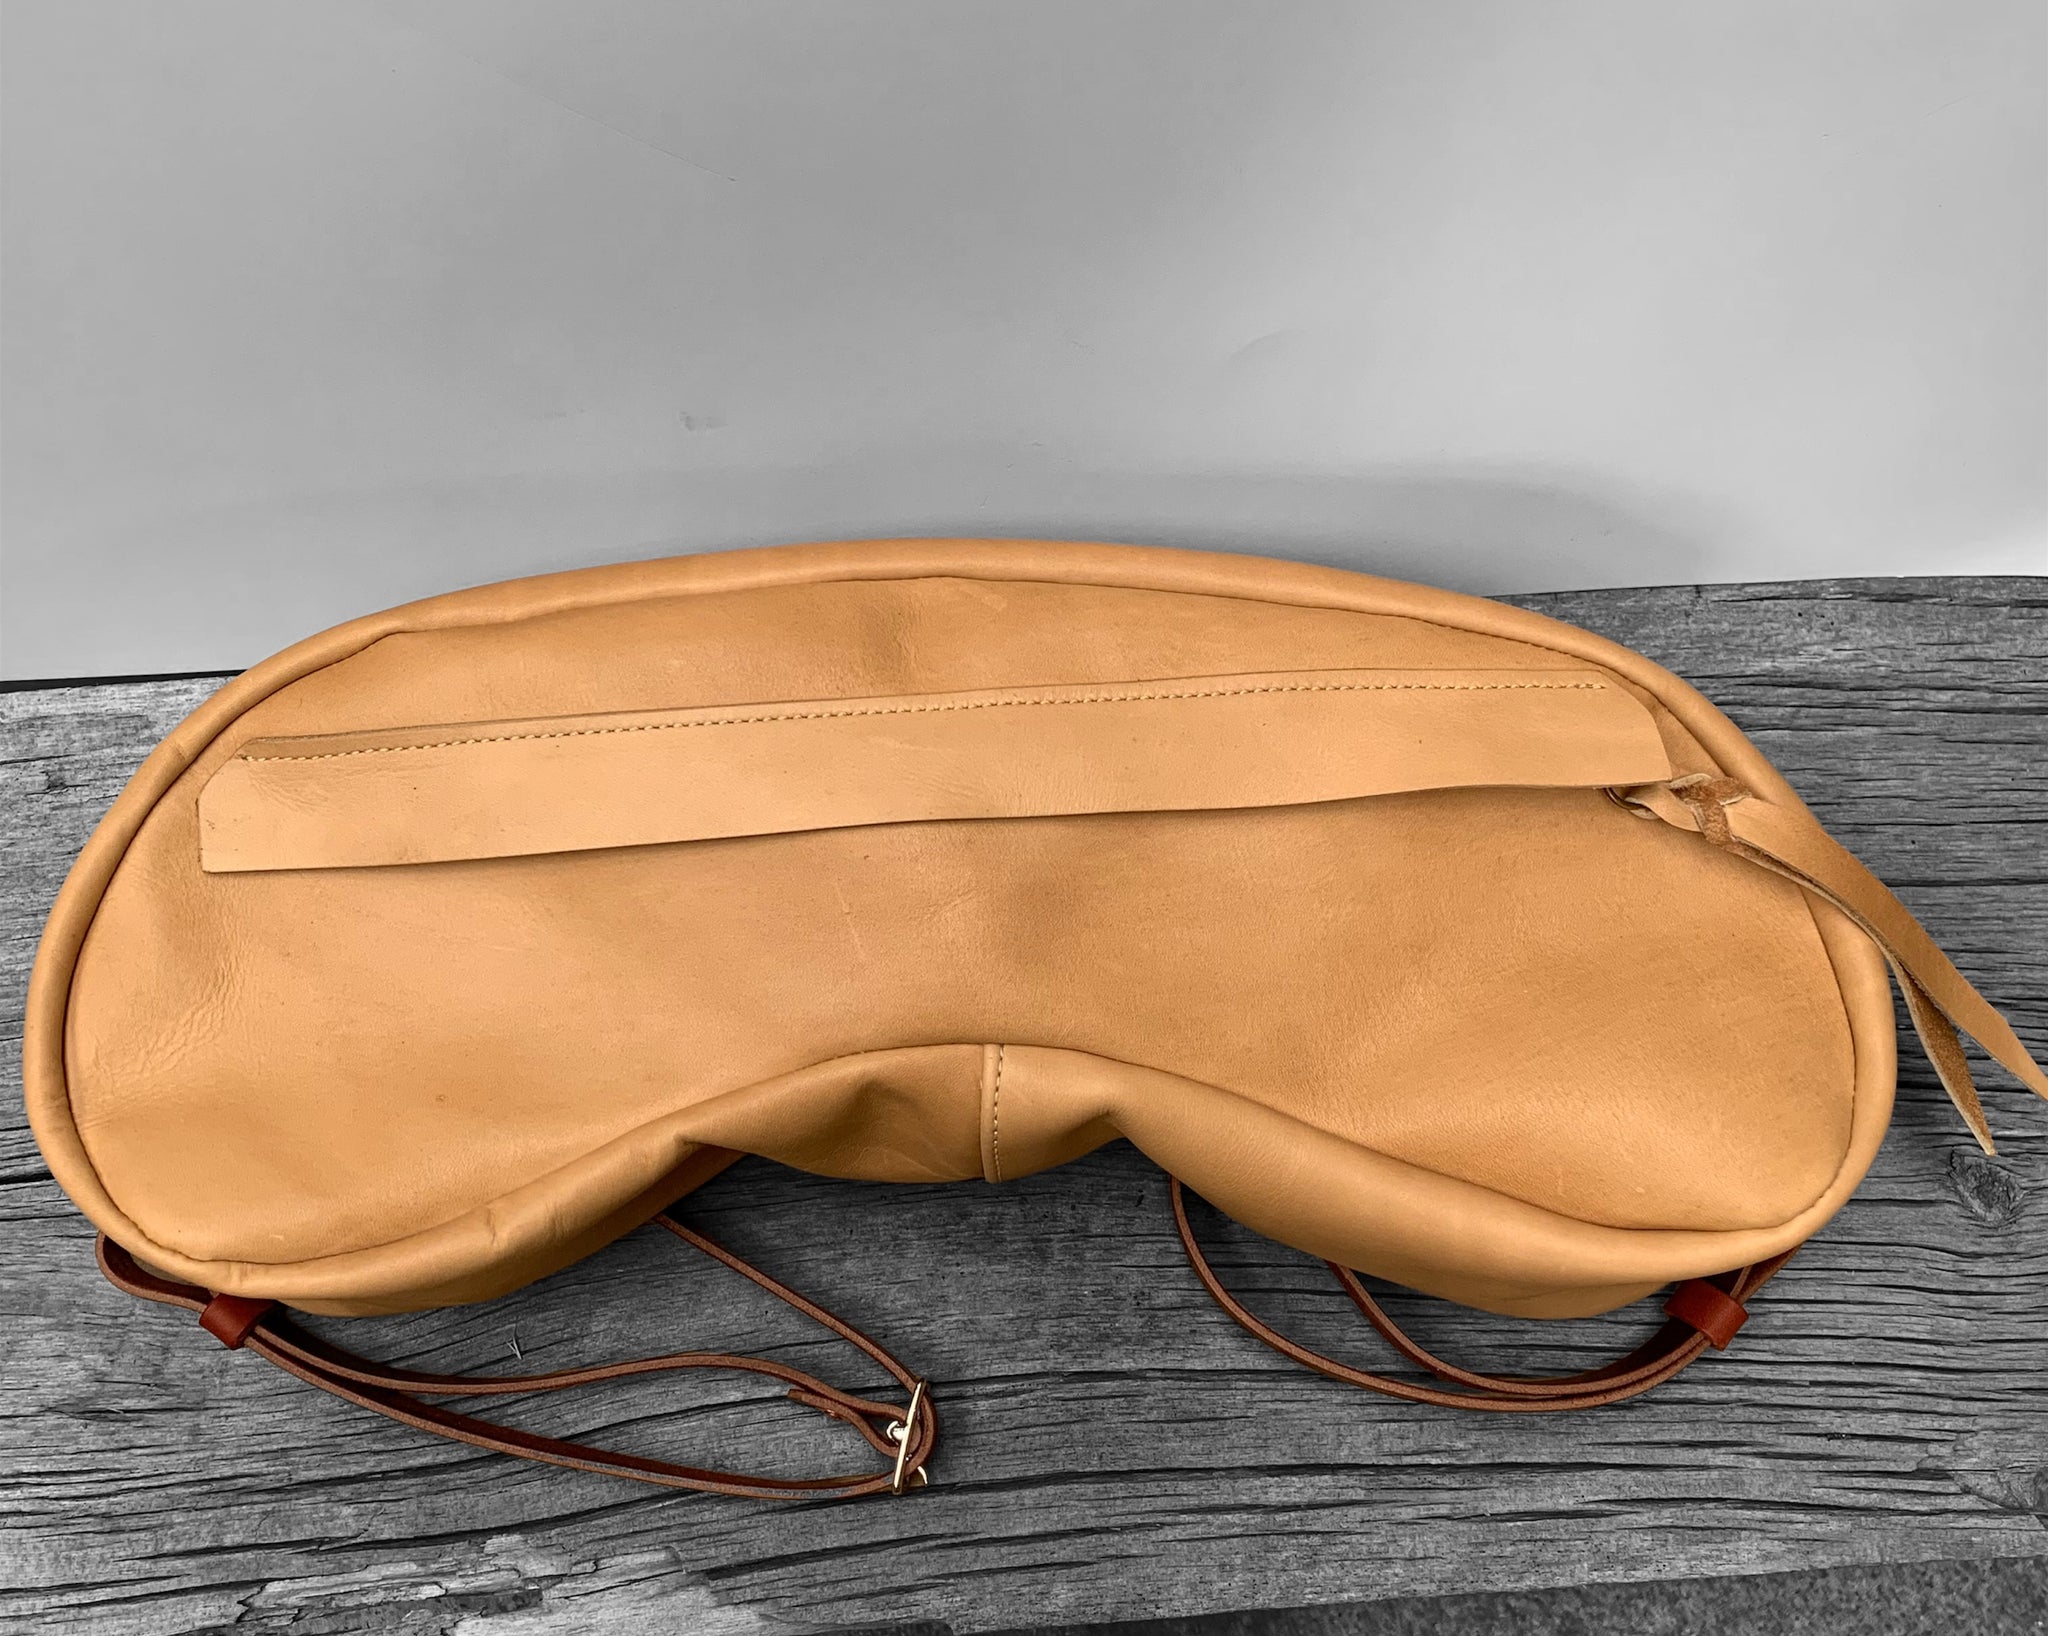 Cantle Bag | Oilskin Accessories by Outback Trading Company –  OutbackTrading.com